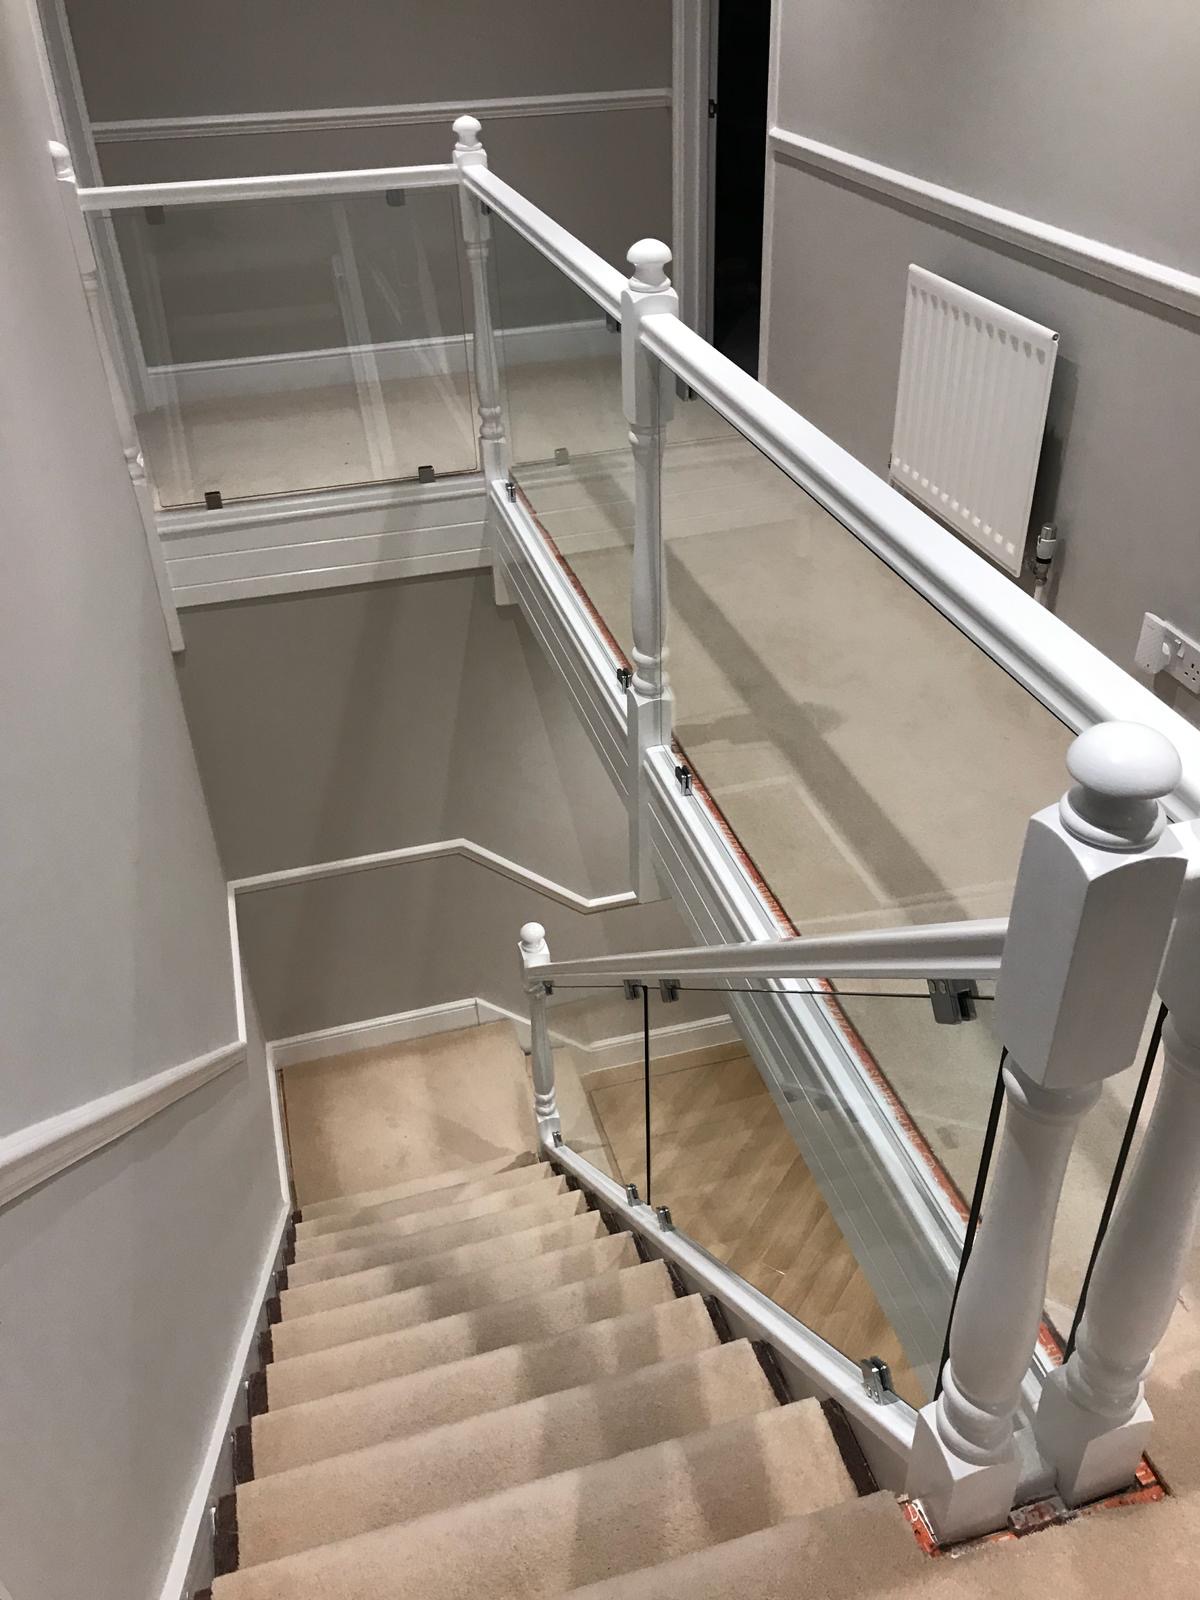 timber framed glass balustrades chinnor, oxfordshire